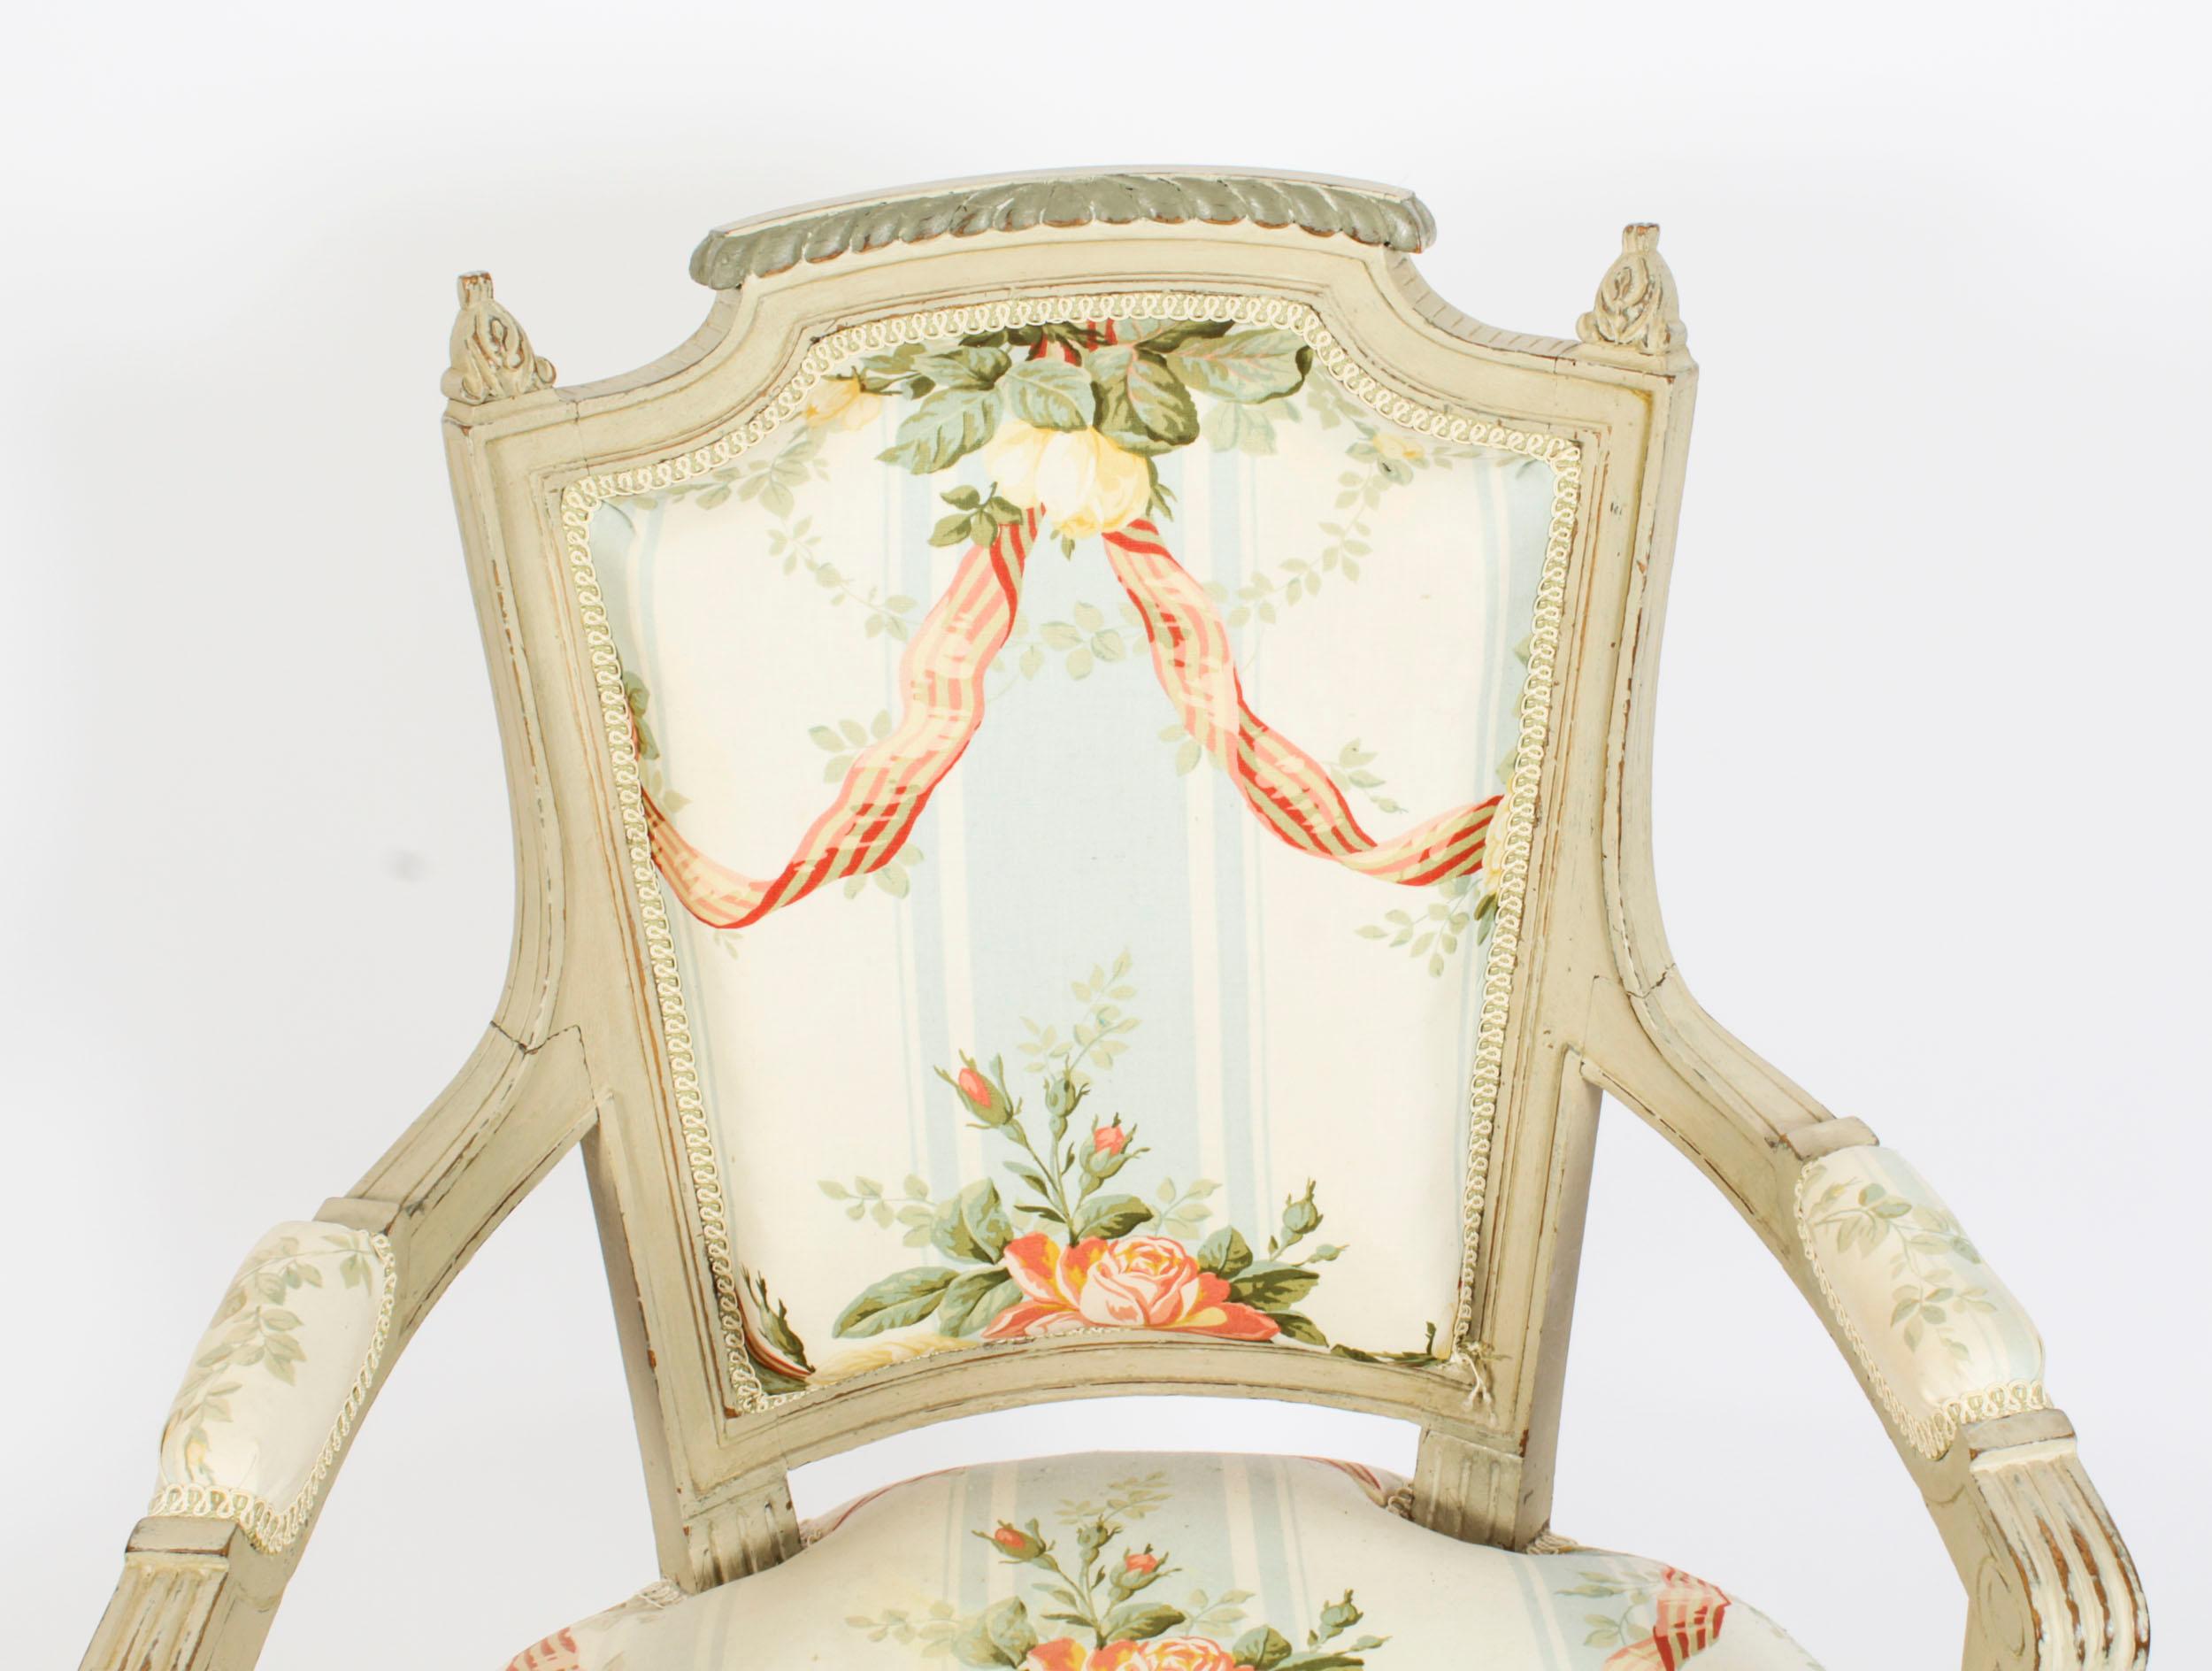 Antique Pair French Louis XVI Revival Painted Fauteuil Armchairs, 19th Century For Sale 10